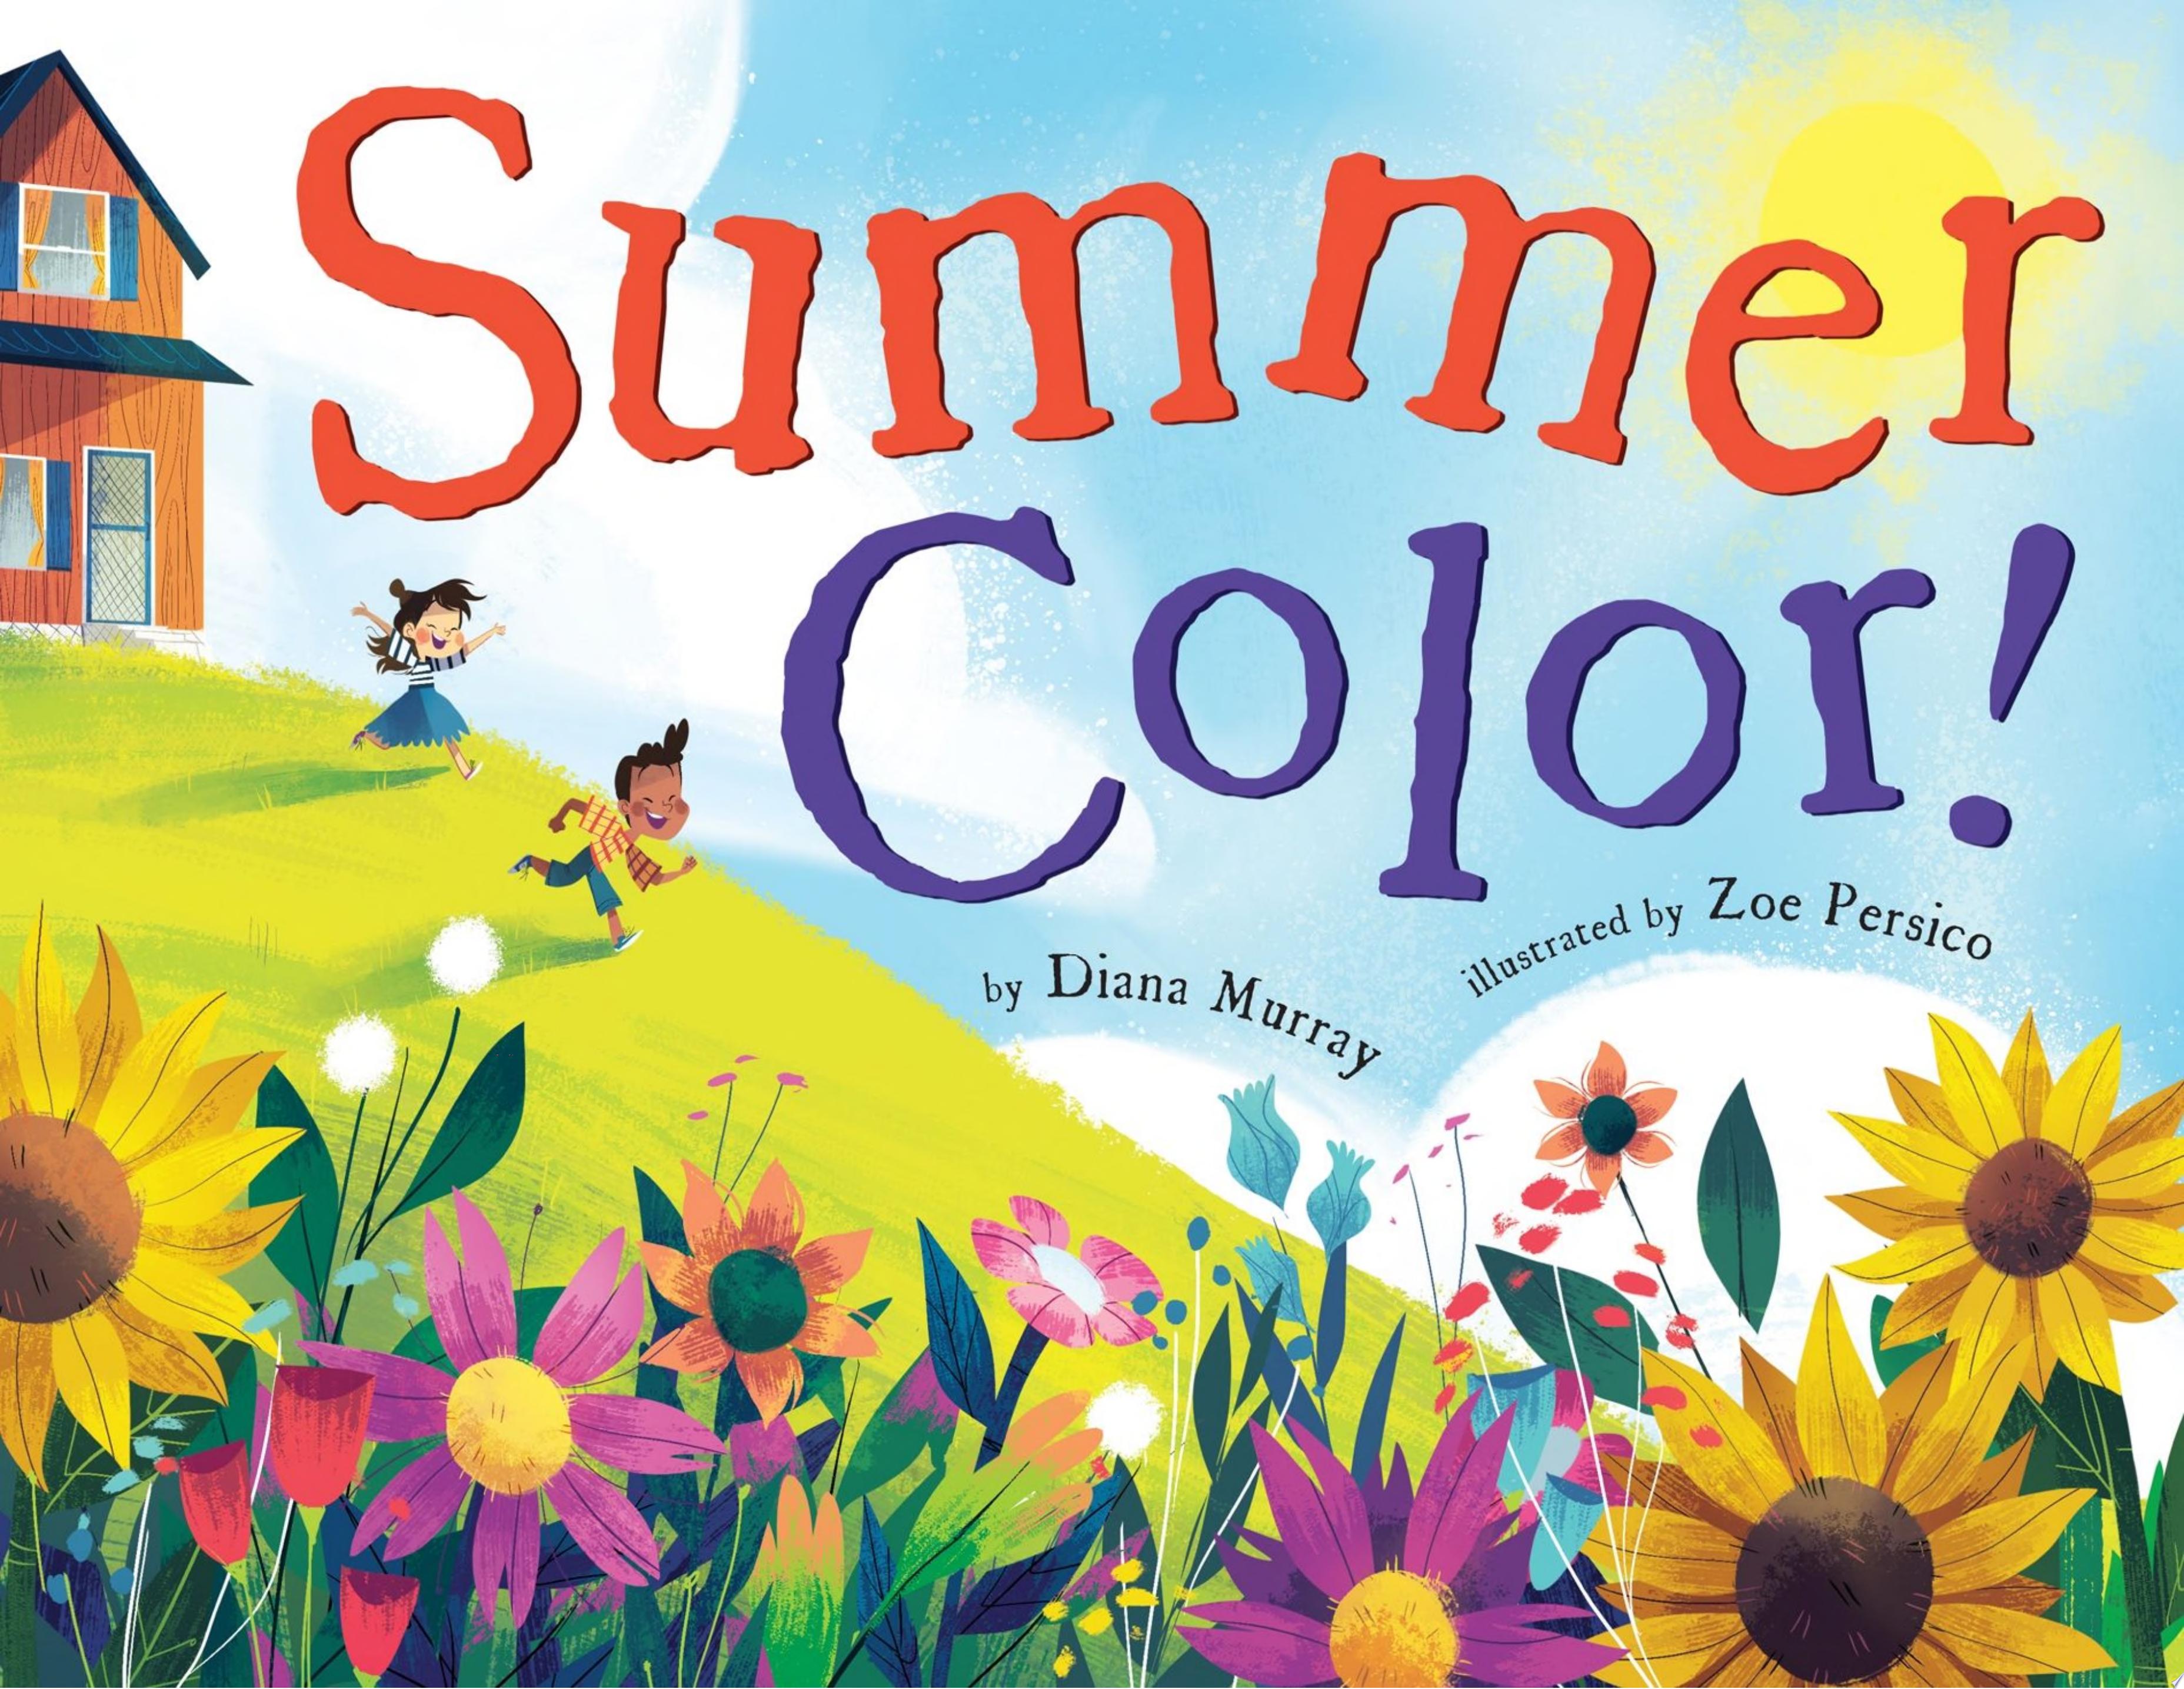 Image for "Summer Color!"